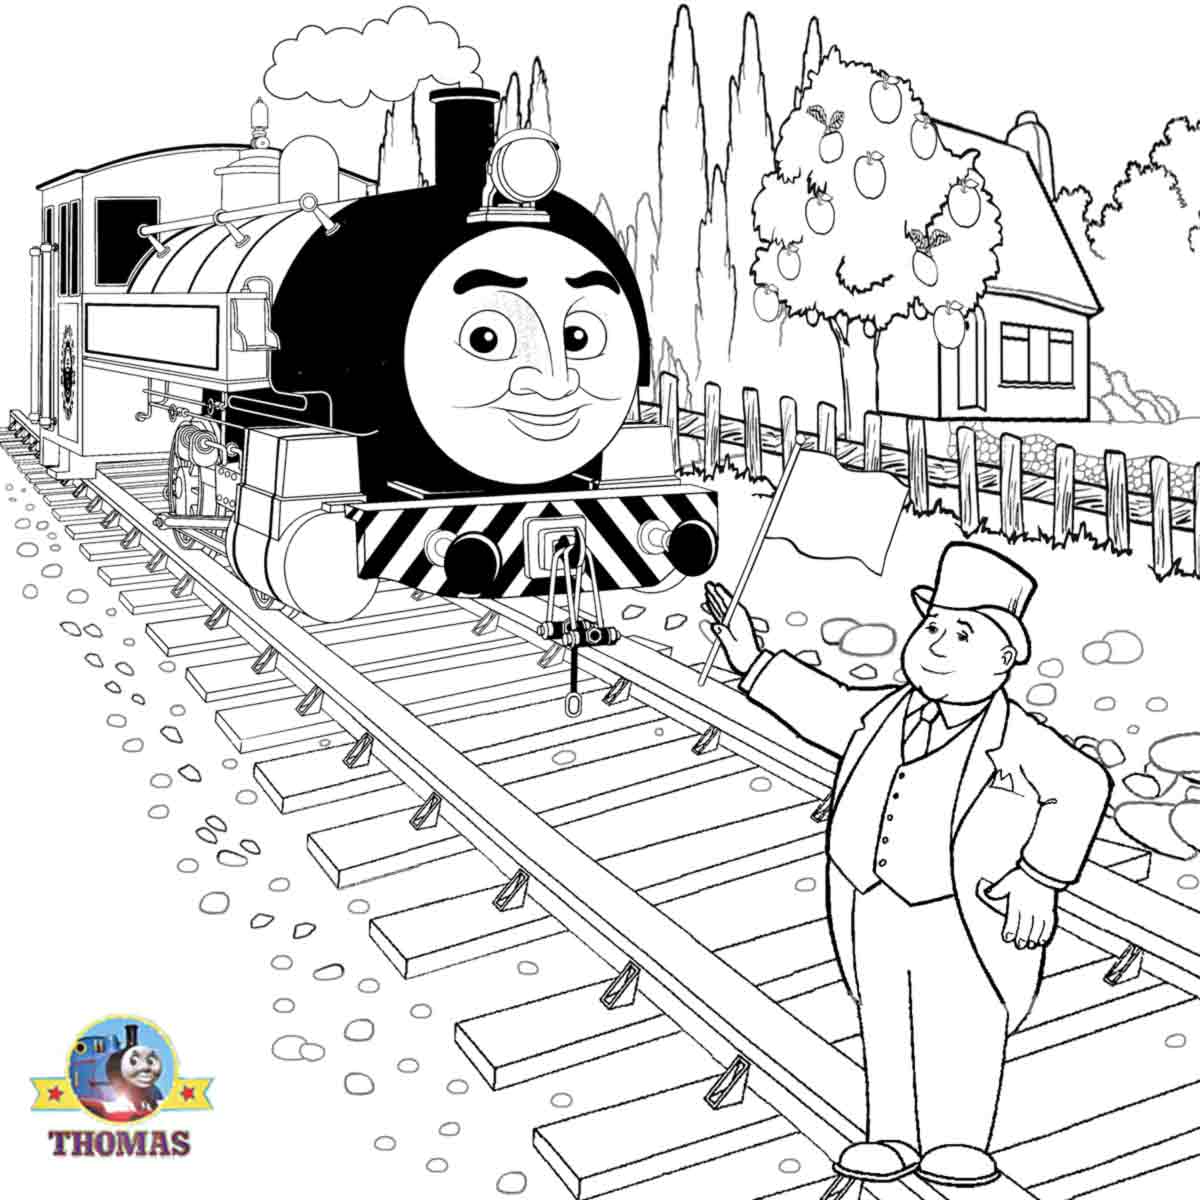 Printable Thomas the tank engine steam train Victor coloring pages to print for kids art activities